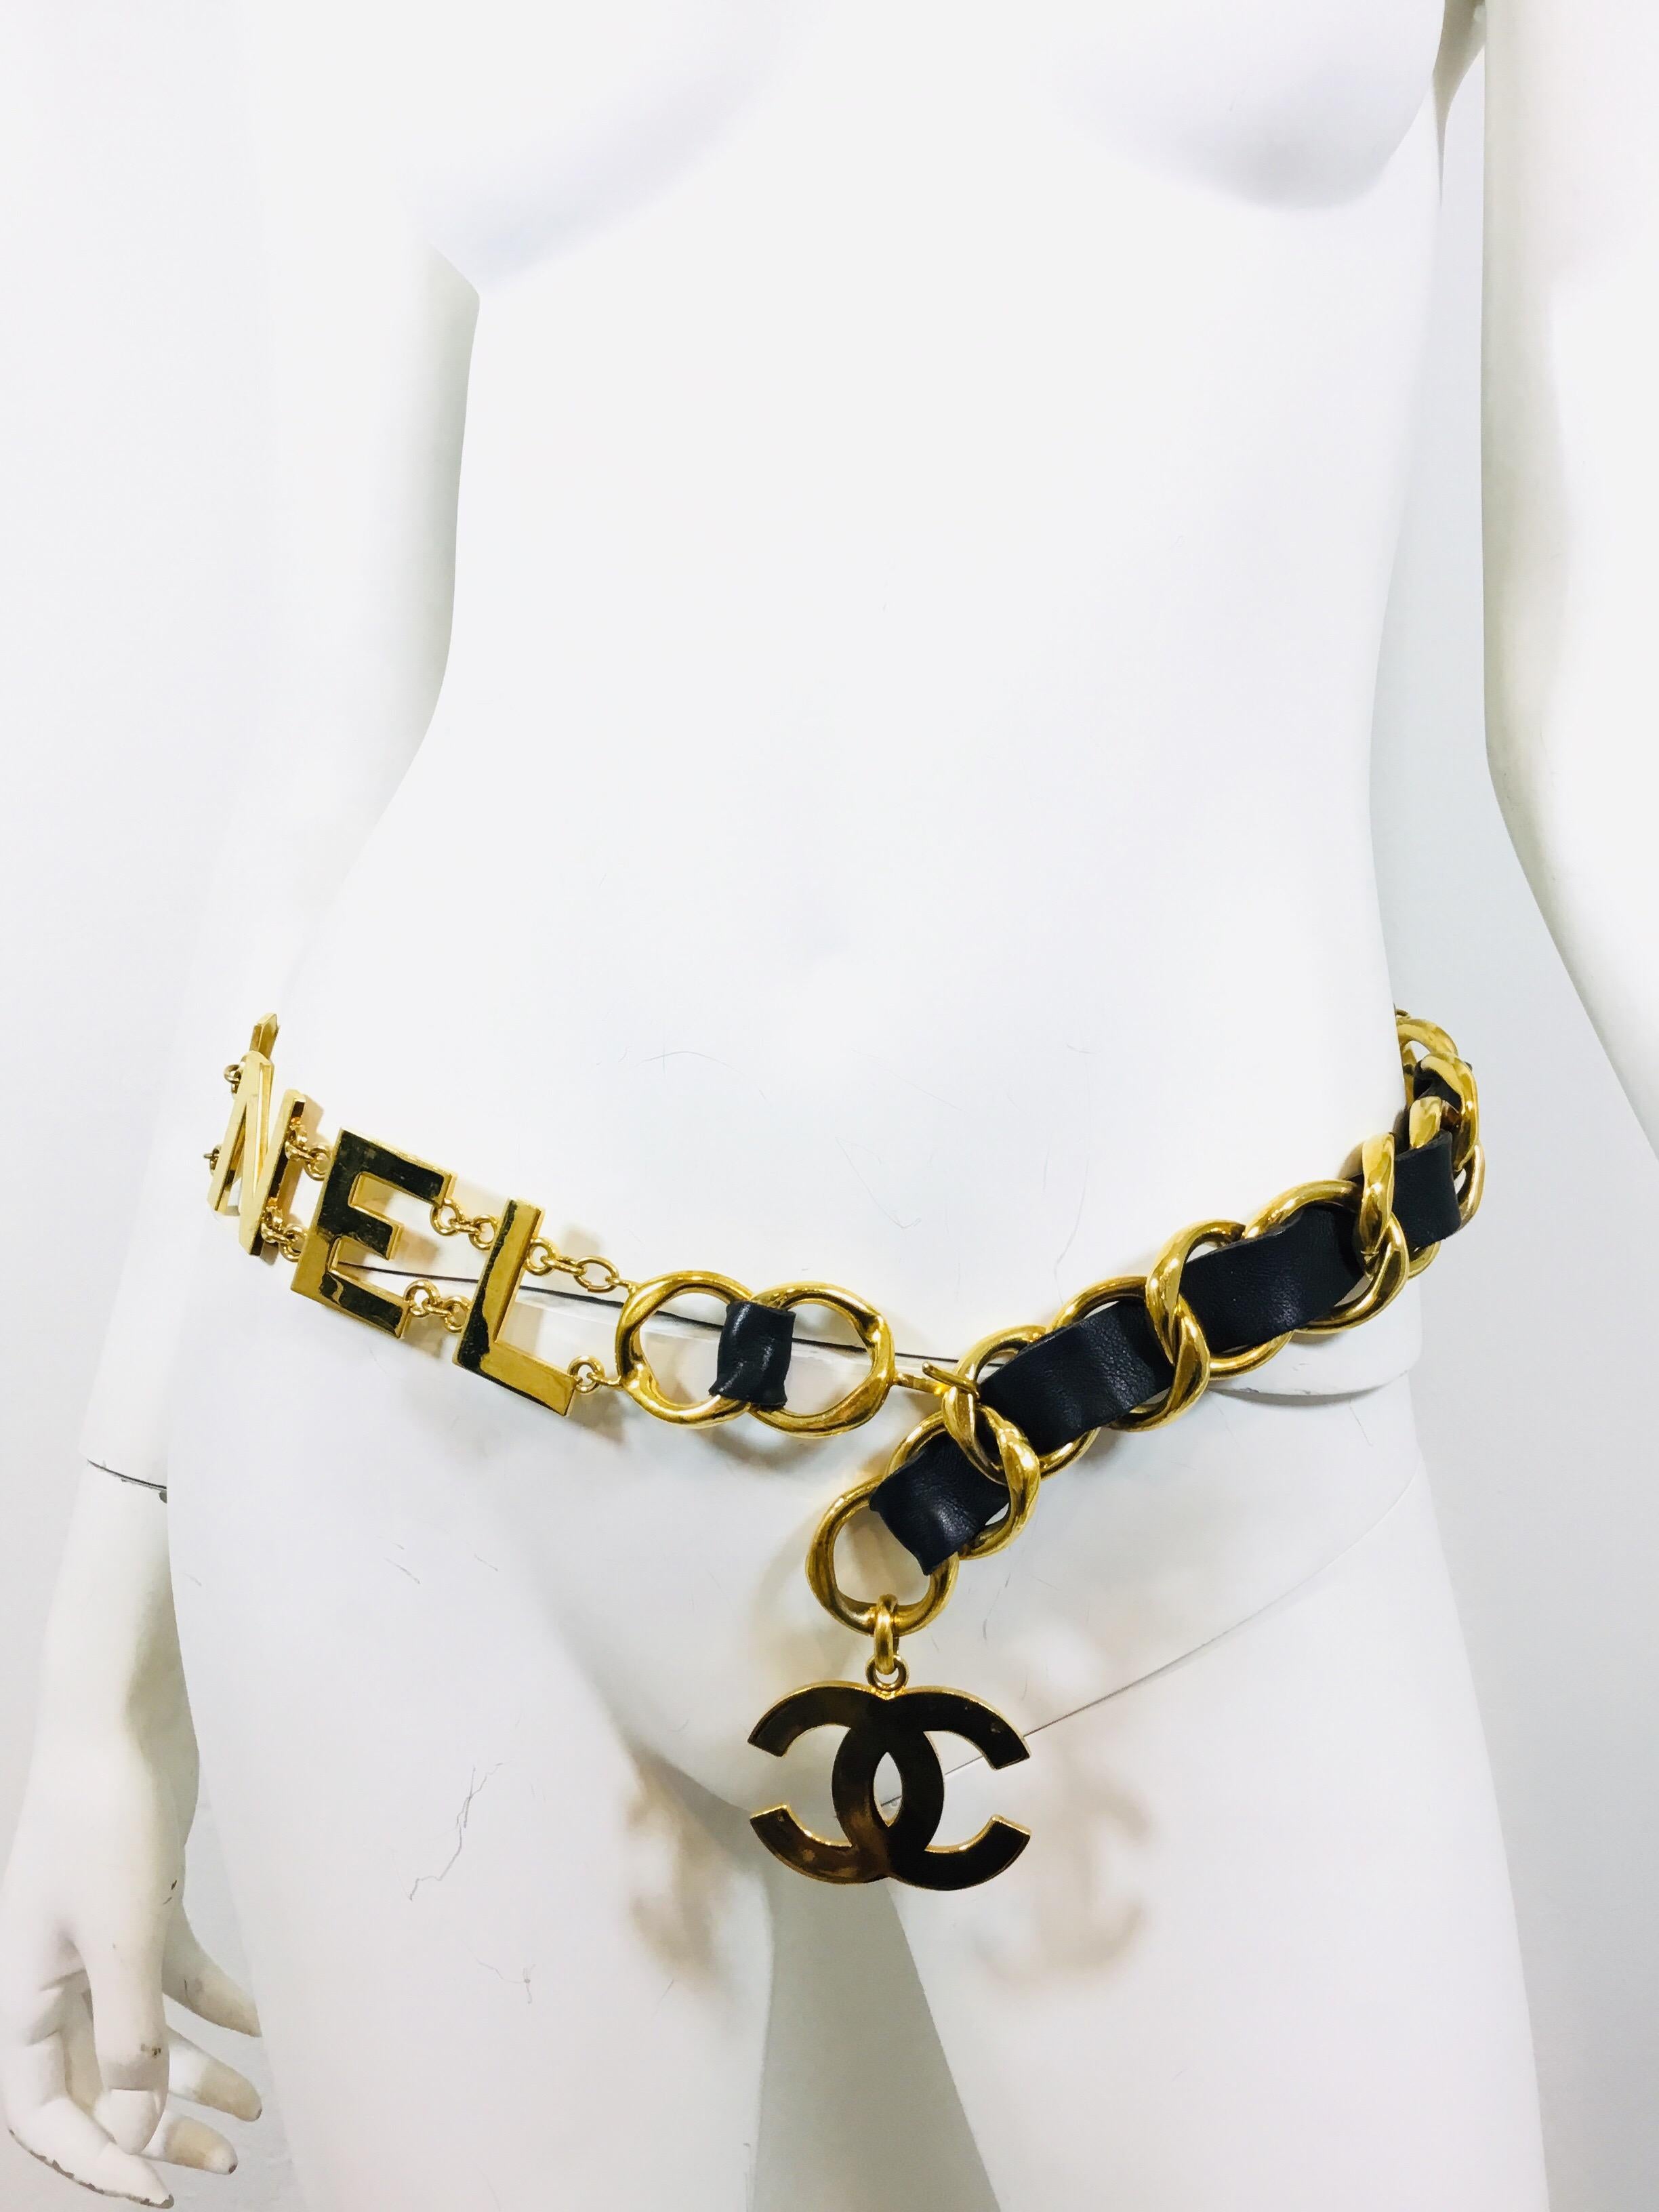 Vintage Chanel belt from 1993 featured in gold with black leather intertwined. Belt spells out “COCO CHANEL” and is approximately 36 inches long and close to 2 inches wide. Belt is in excellent vintage condition with some normal light scratches to